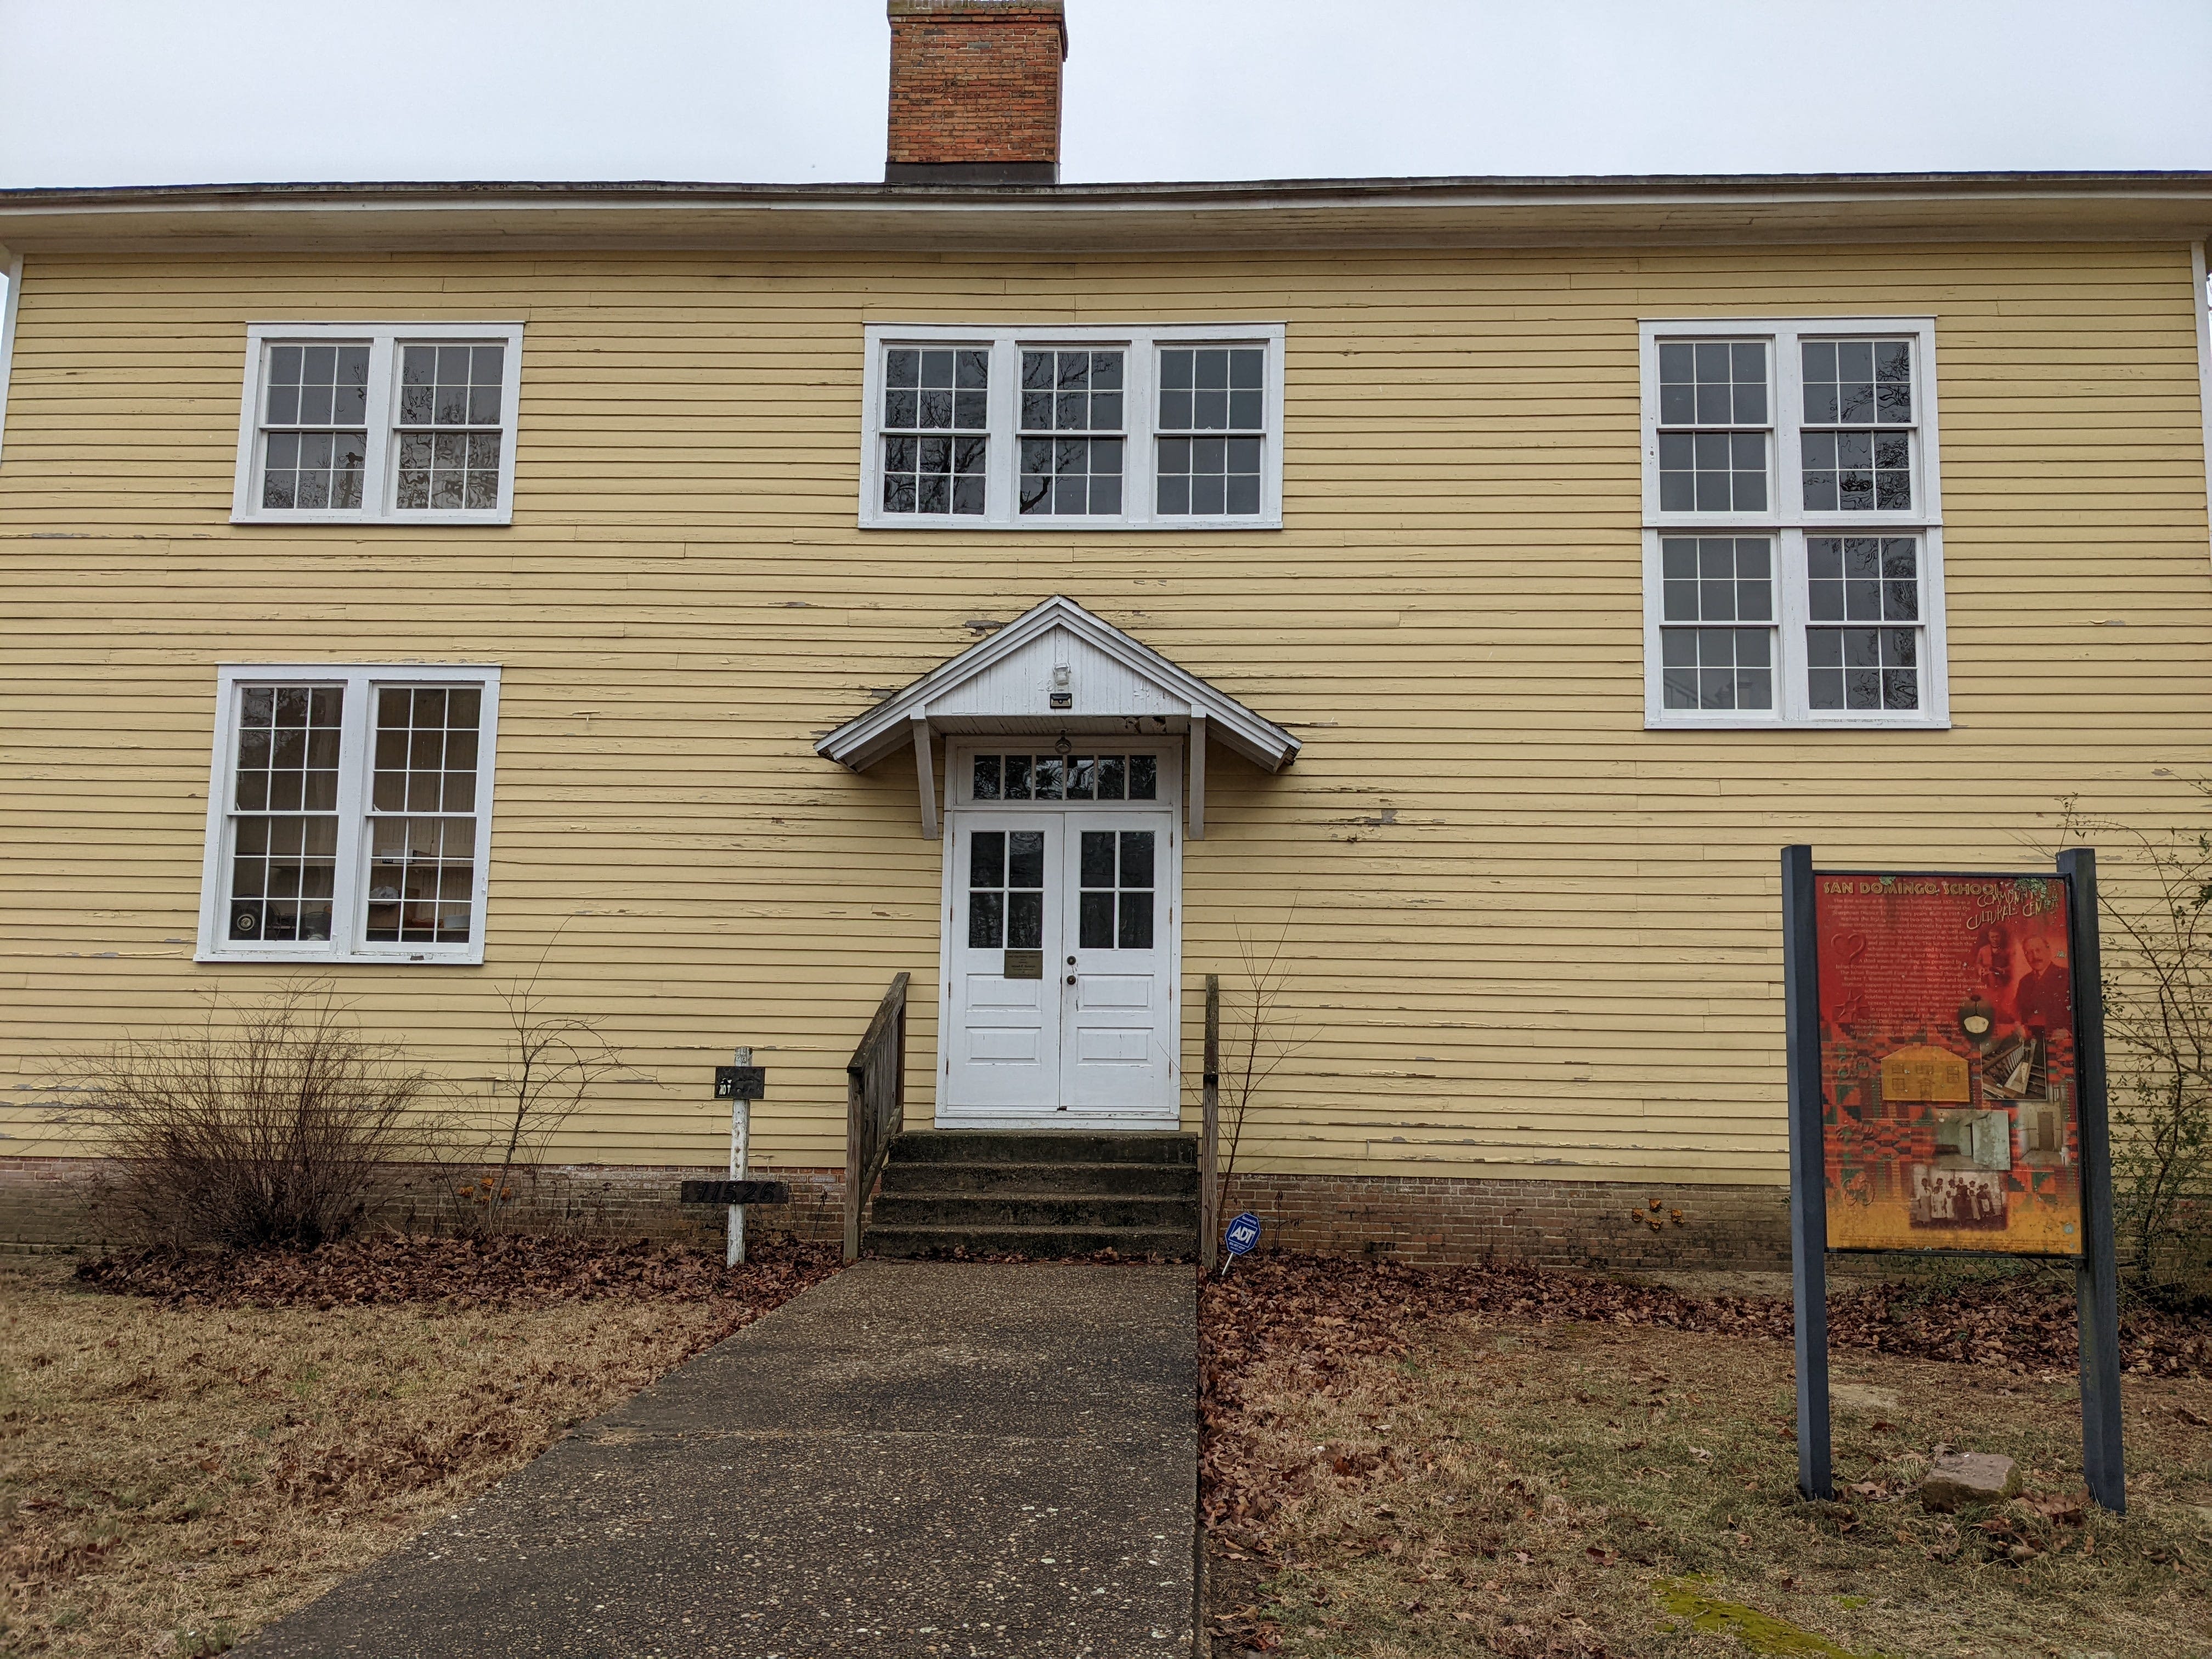 National Parks Service approves Maryland Rosenwald school as 'candidate' for historic site